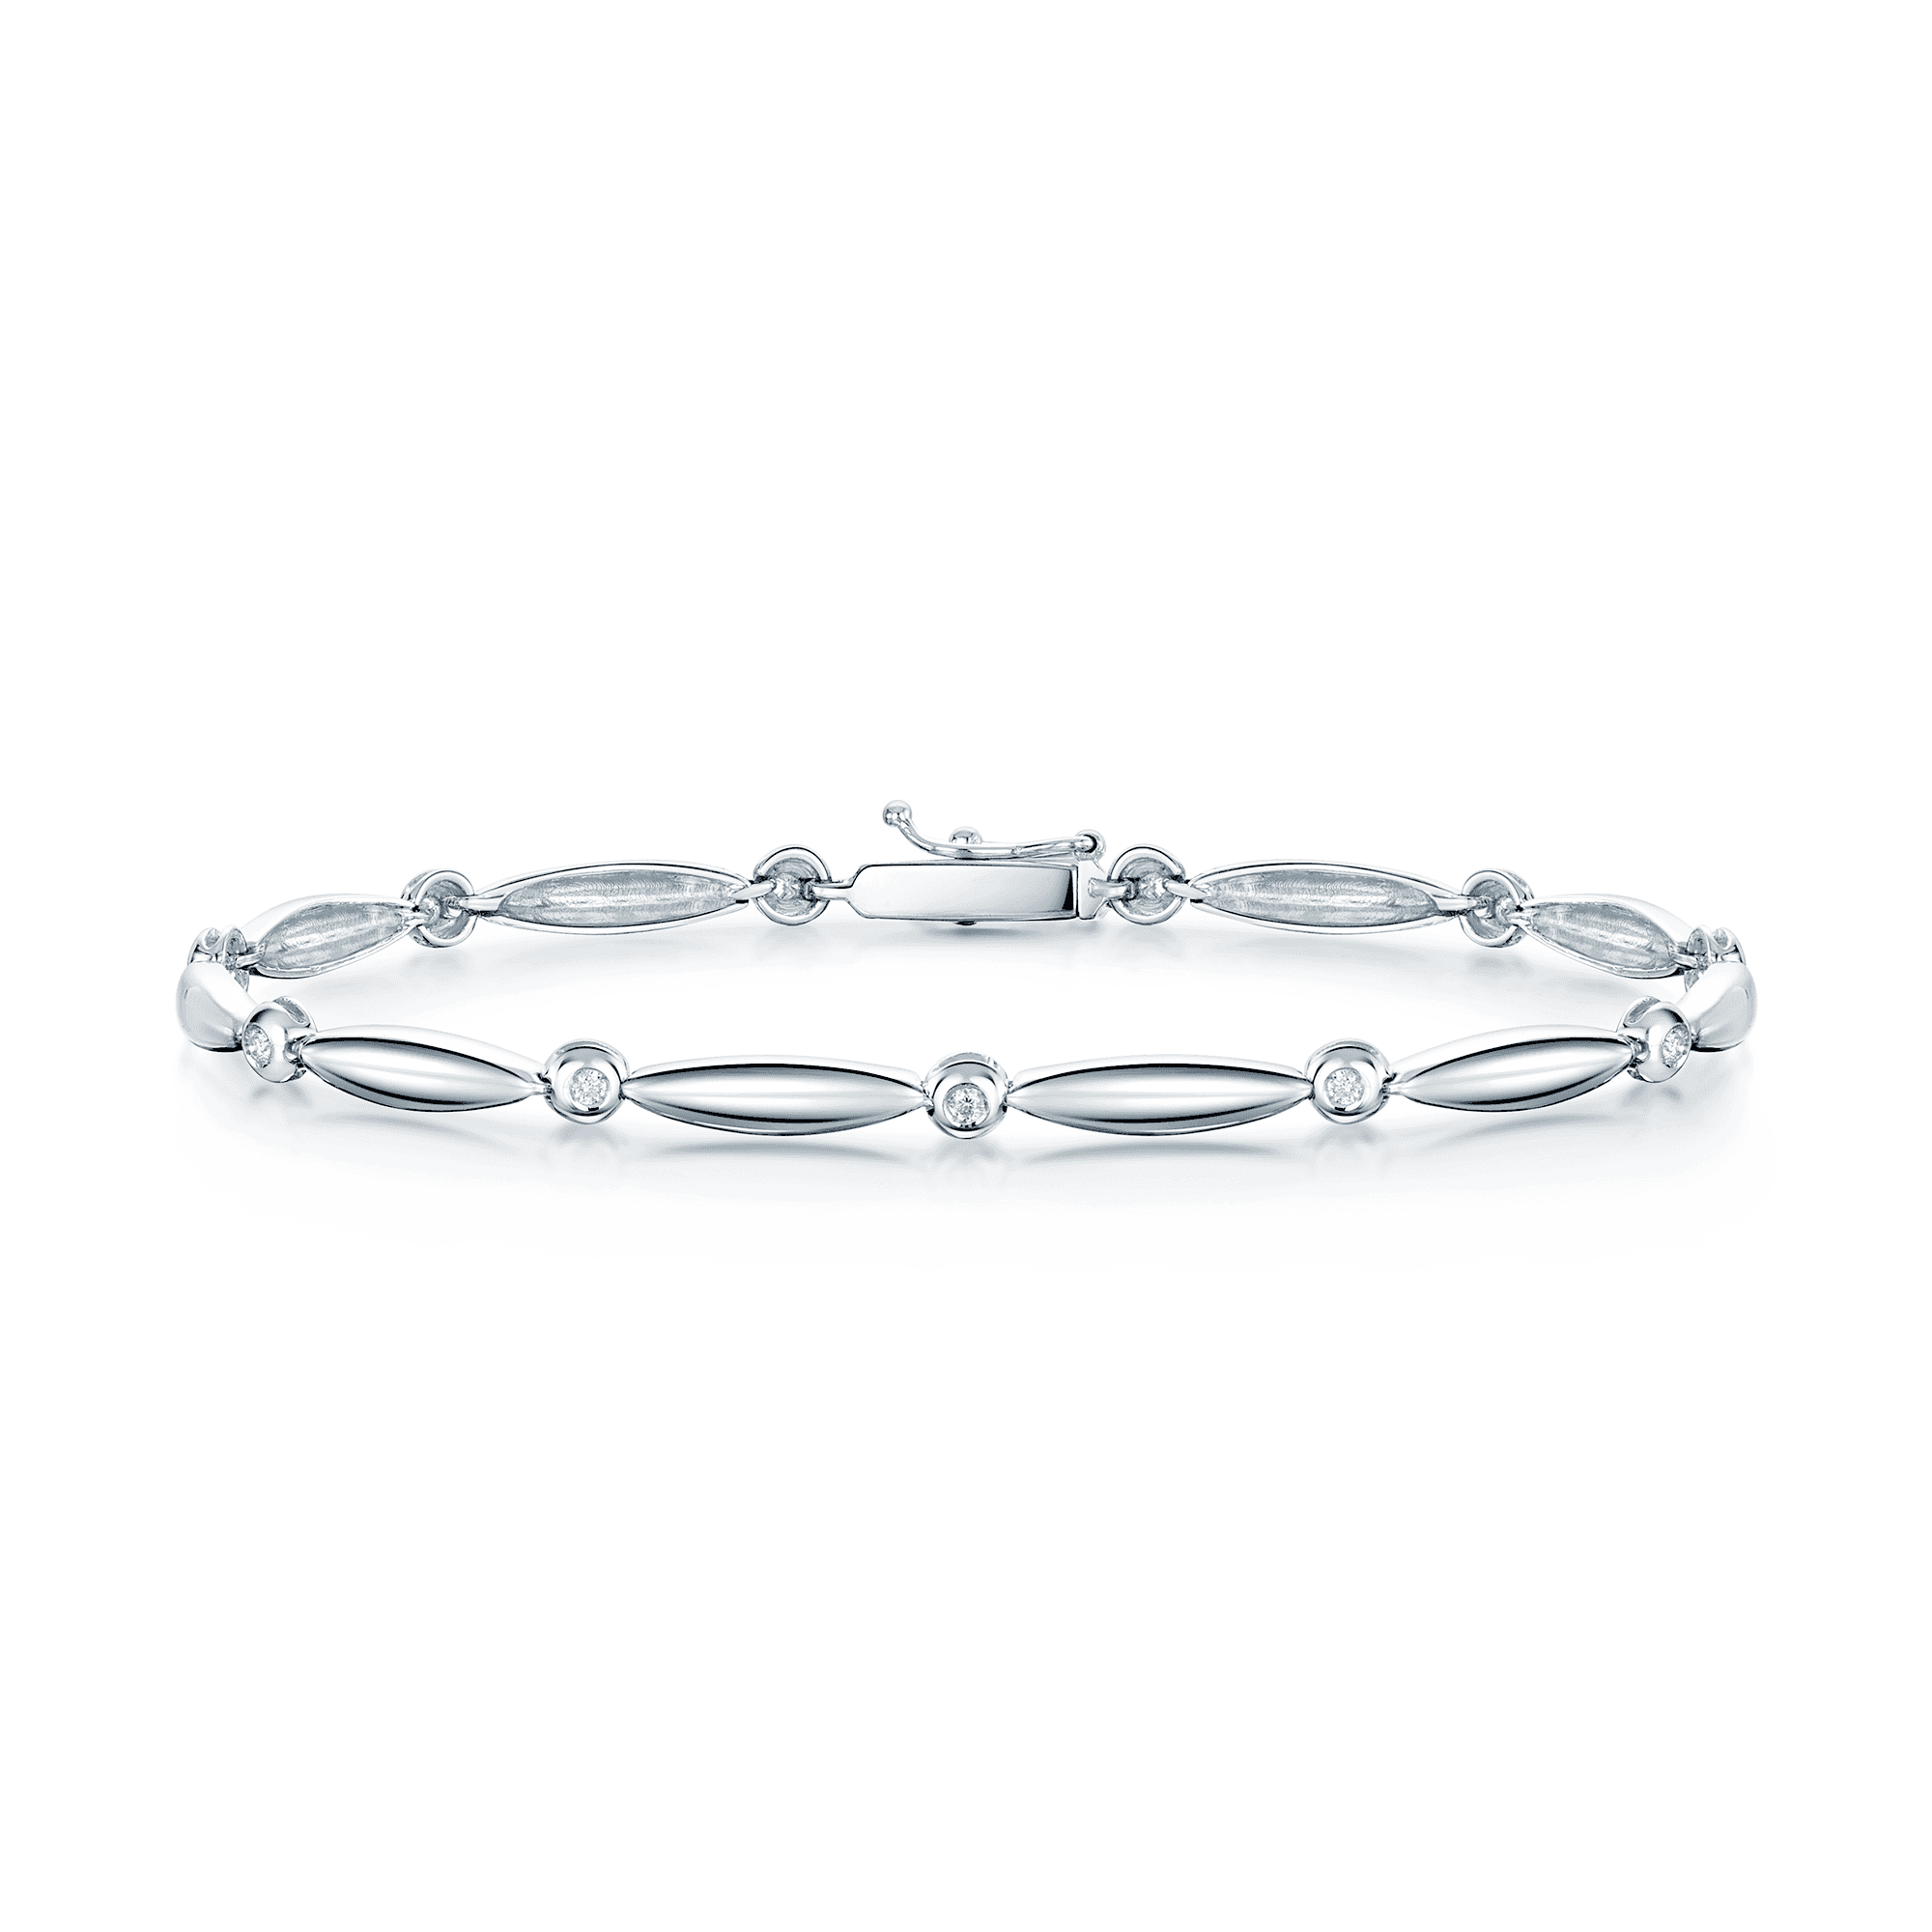 18ct White Gold Marquise Shape Bar Bracelet With Rub Over Diamond Set Spacers